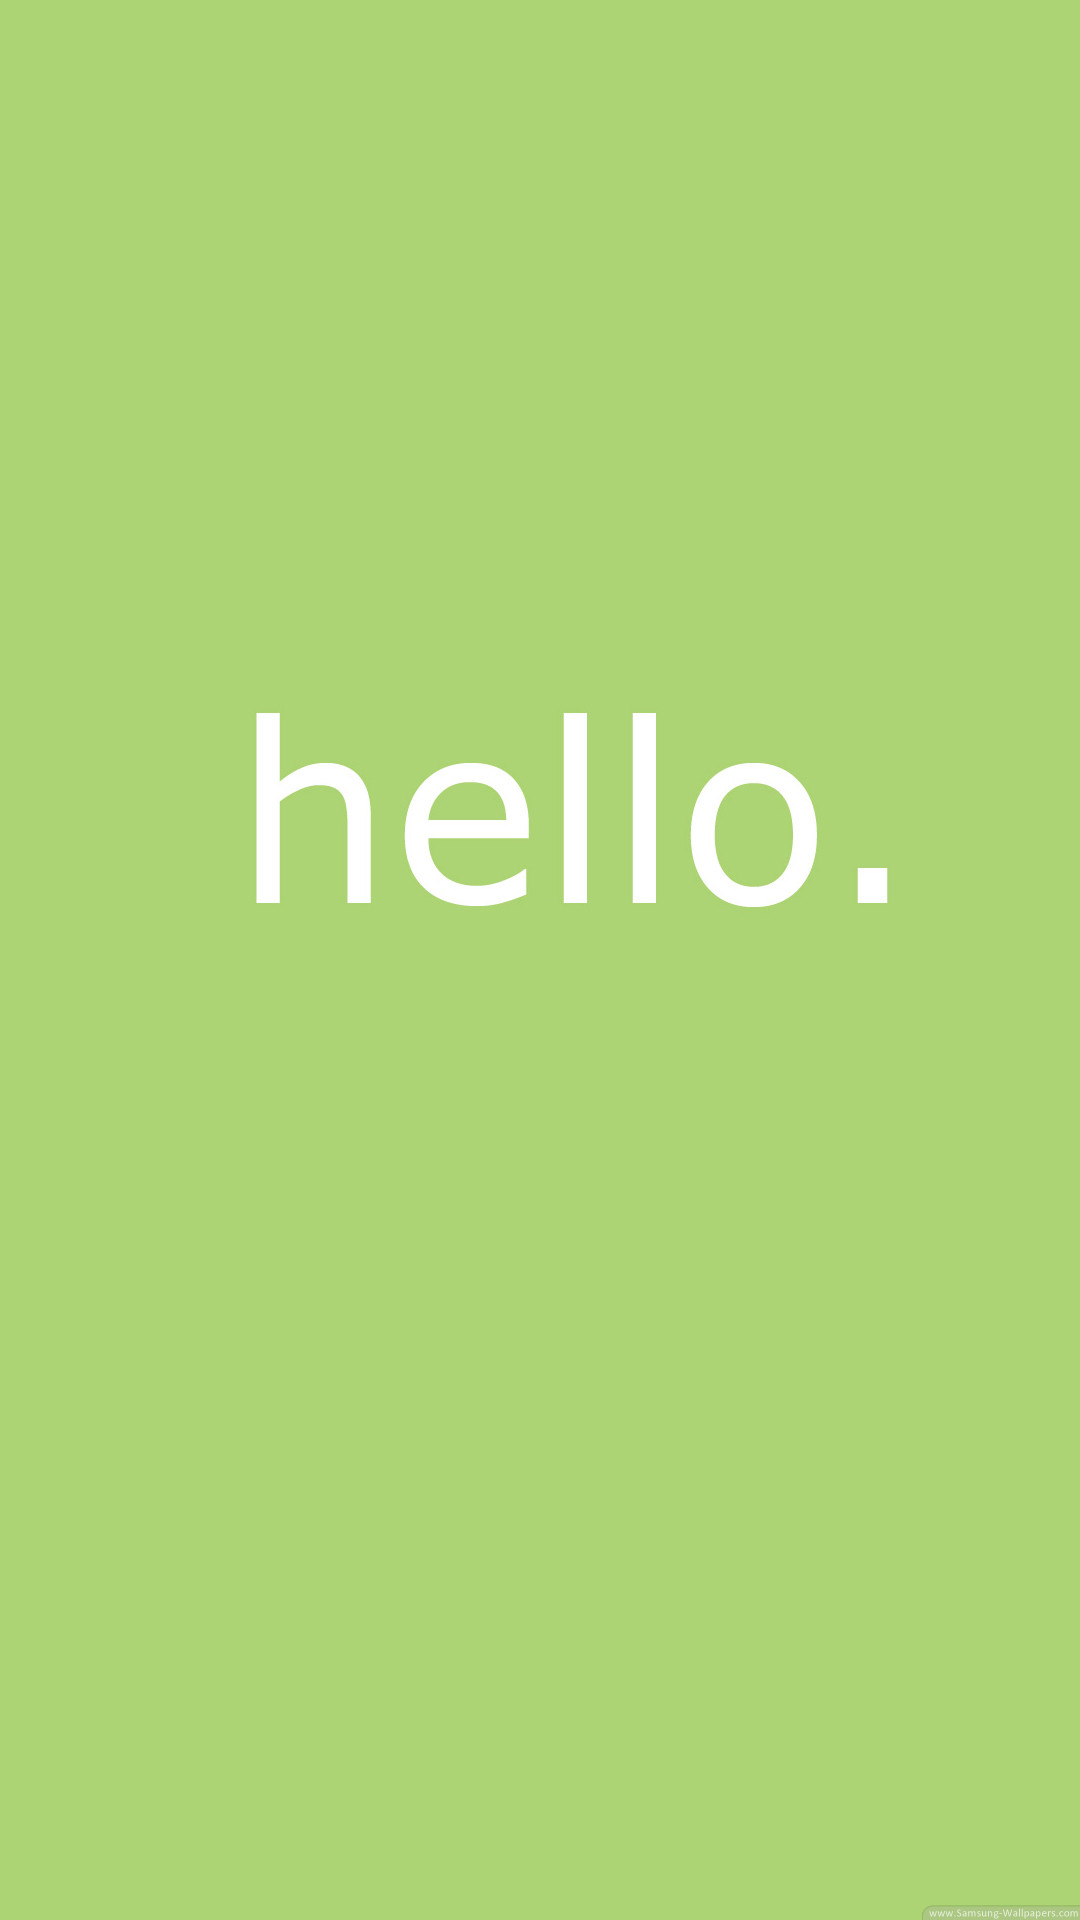 1080x1920 Simple Hello Message Background iPhone 8 wallpaper